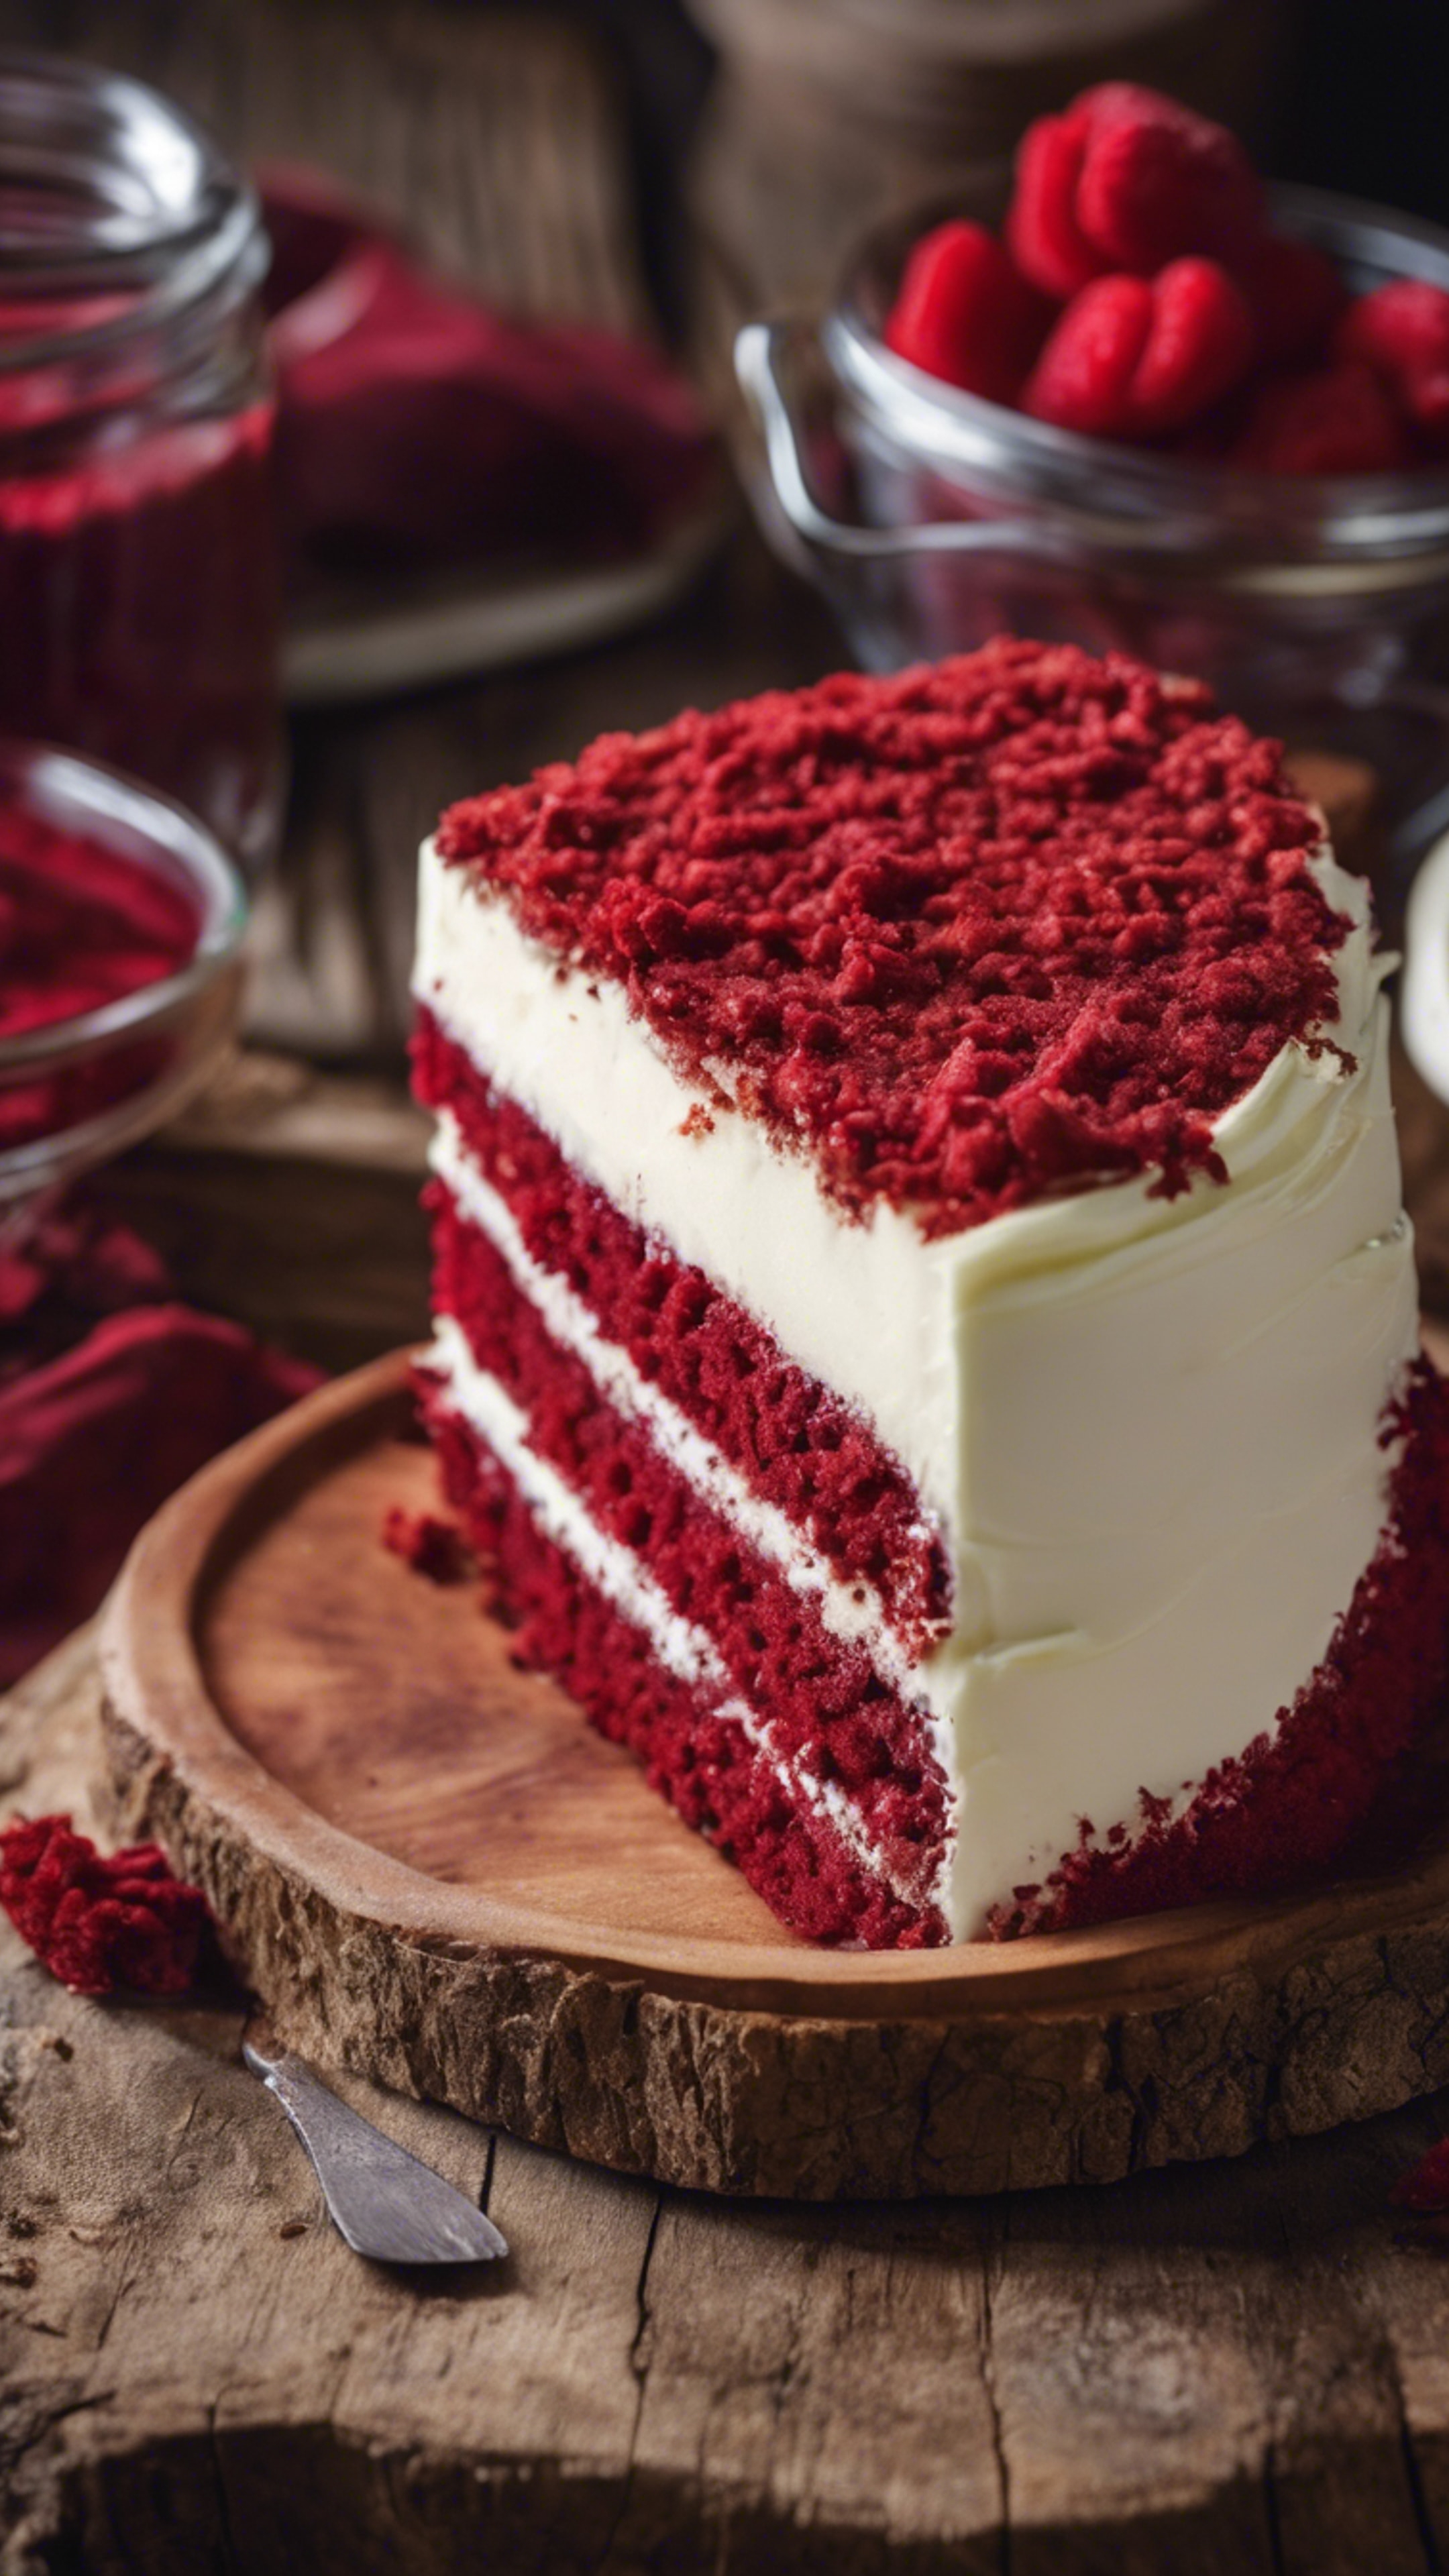 A slice of rich red velvet cake with a layer of cream cheese frosting, placed on a rustic wooden table. Wallpaper[5b147ad1f433484e86de]